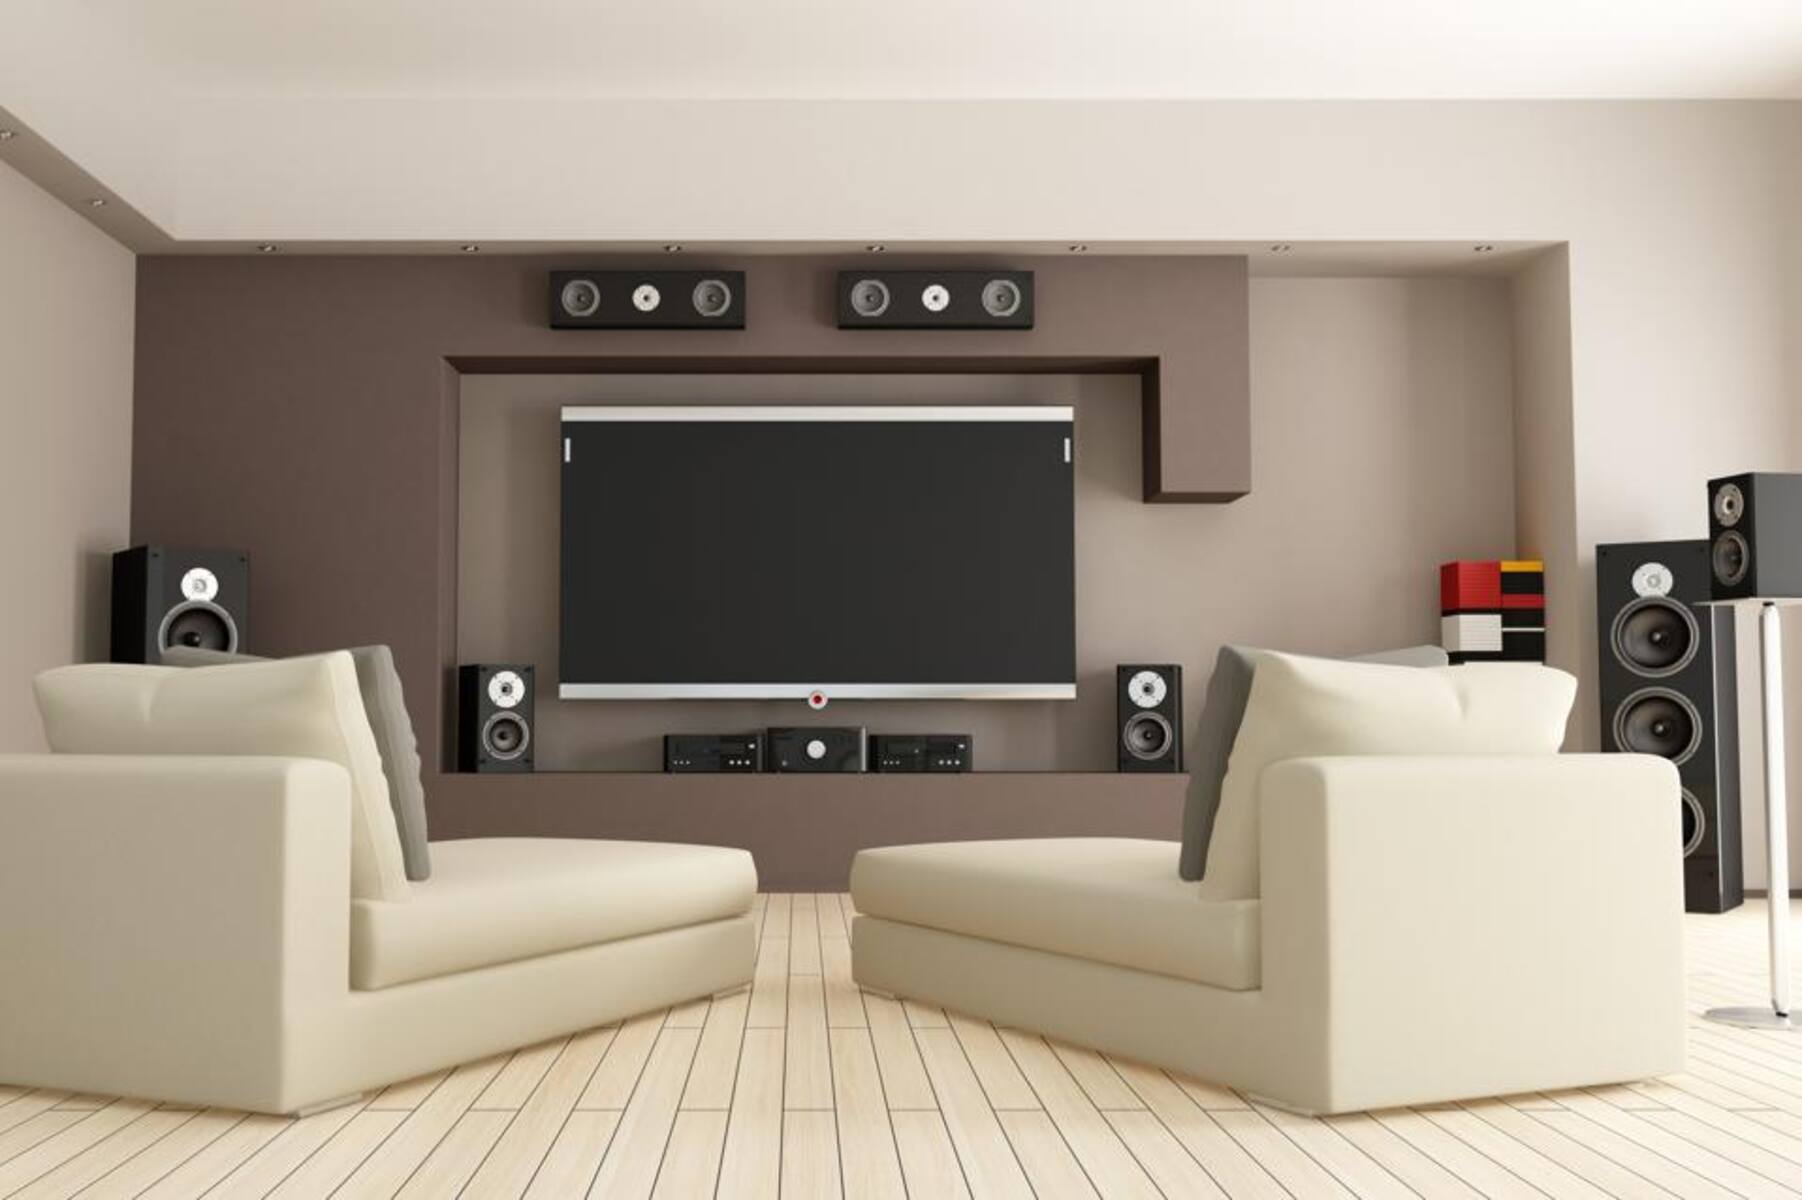 How To Hook Up A Surround Sound System To An Emerson TV